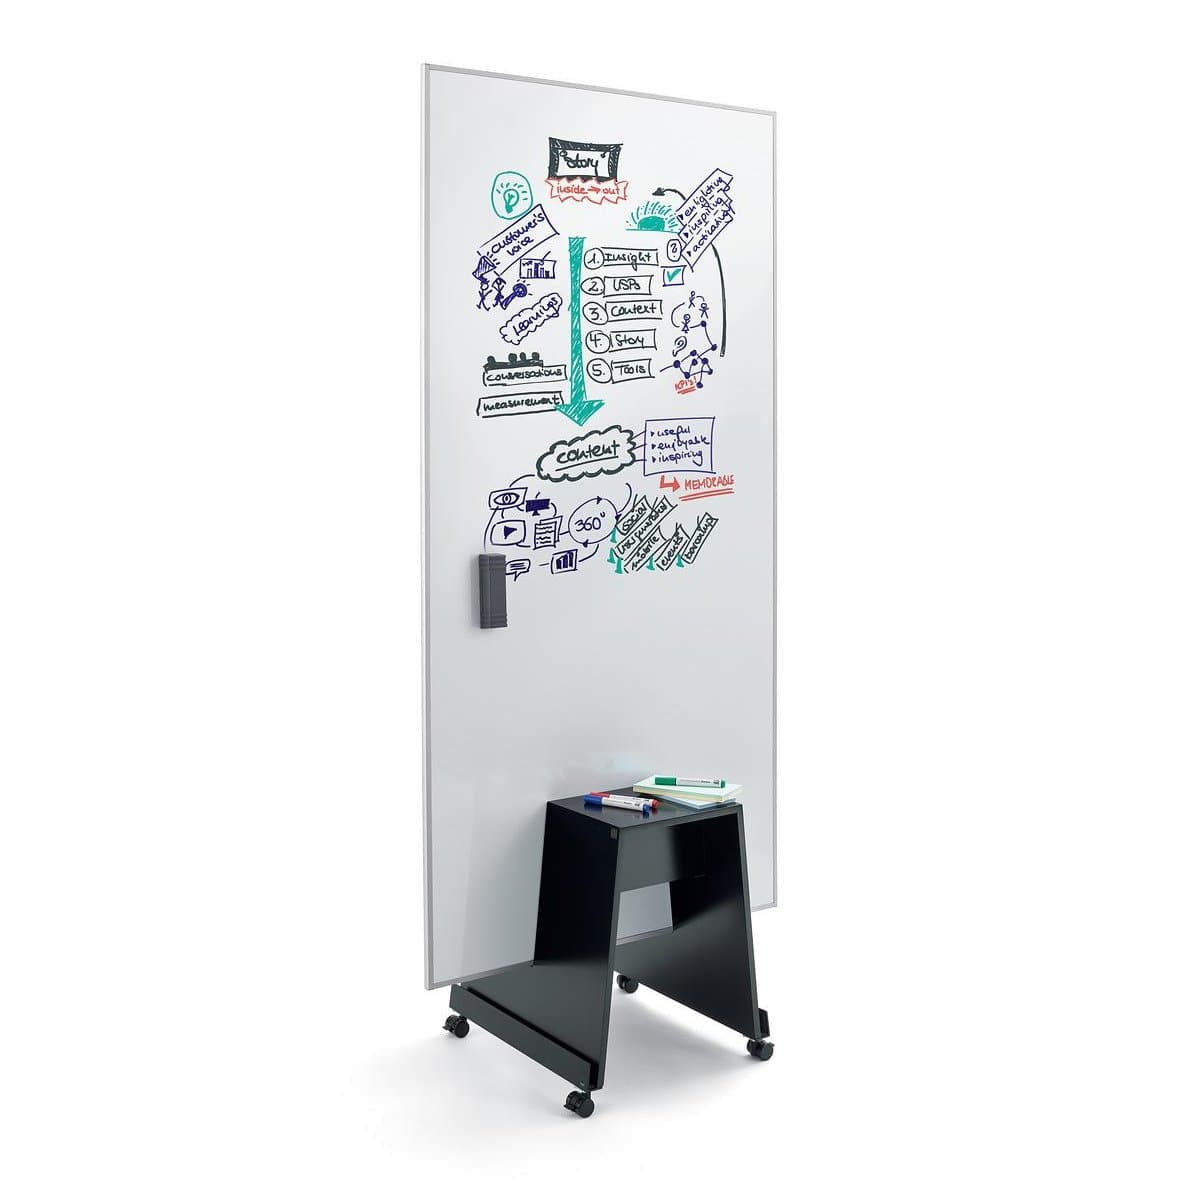 Sigel MEET UP Agile White Board with Agile Base, 90x180cm, White